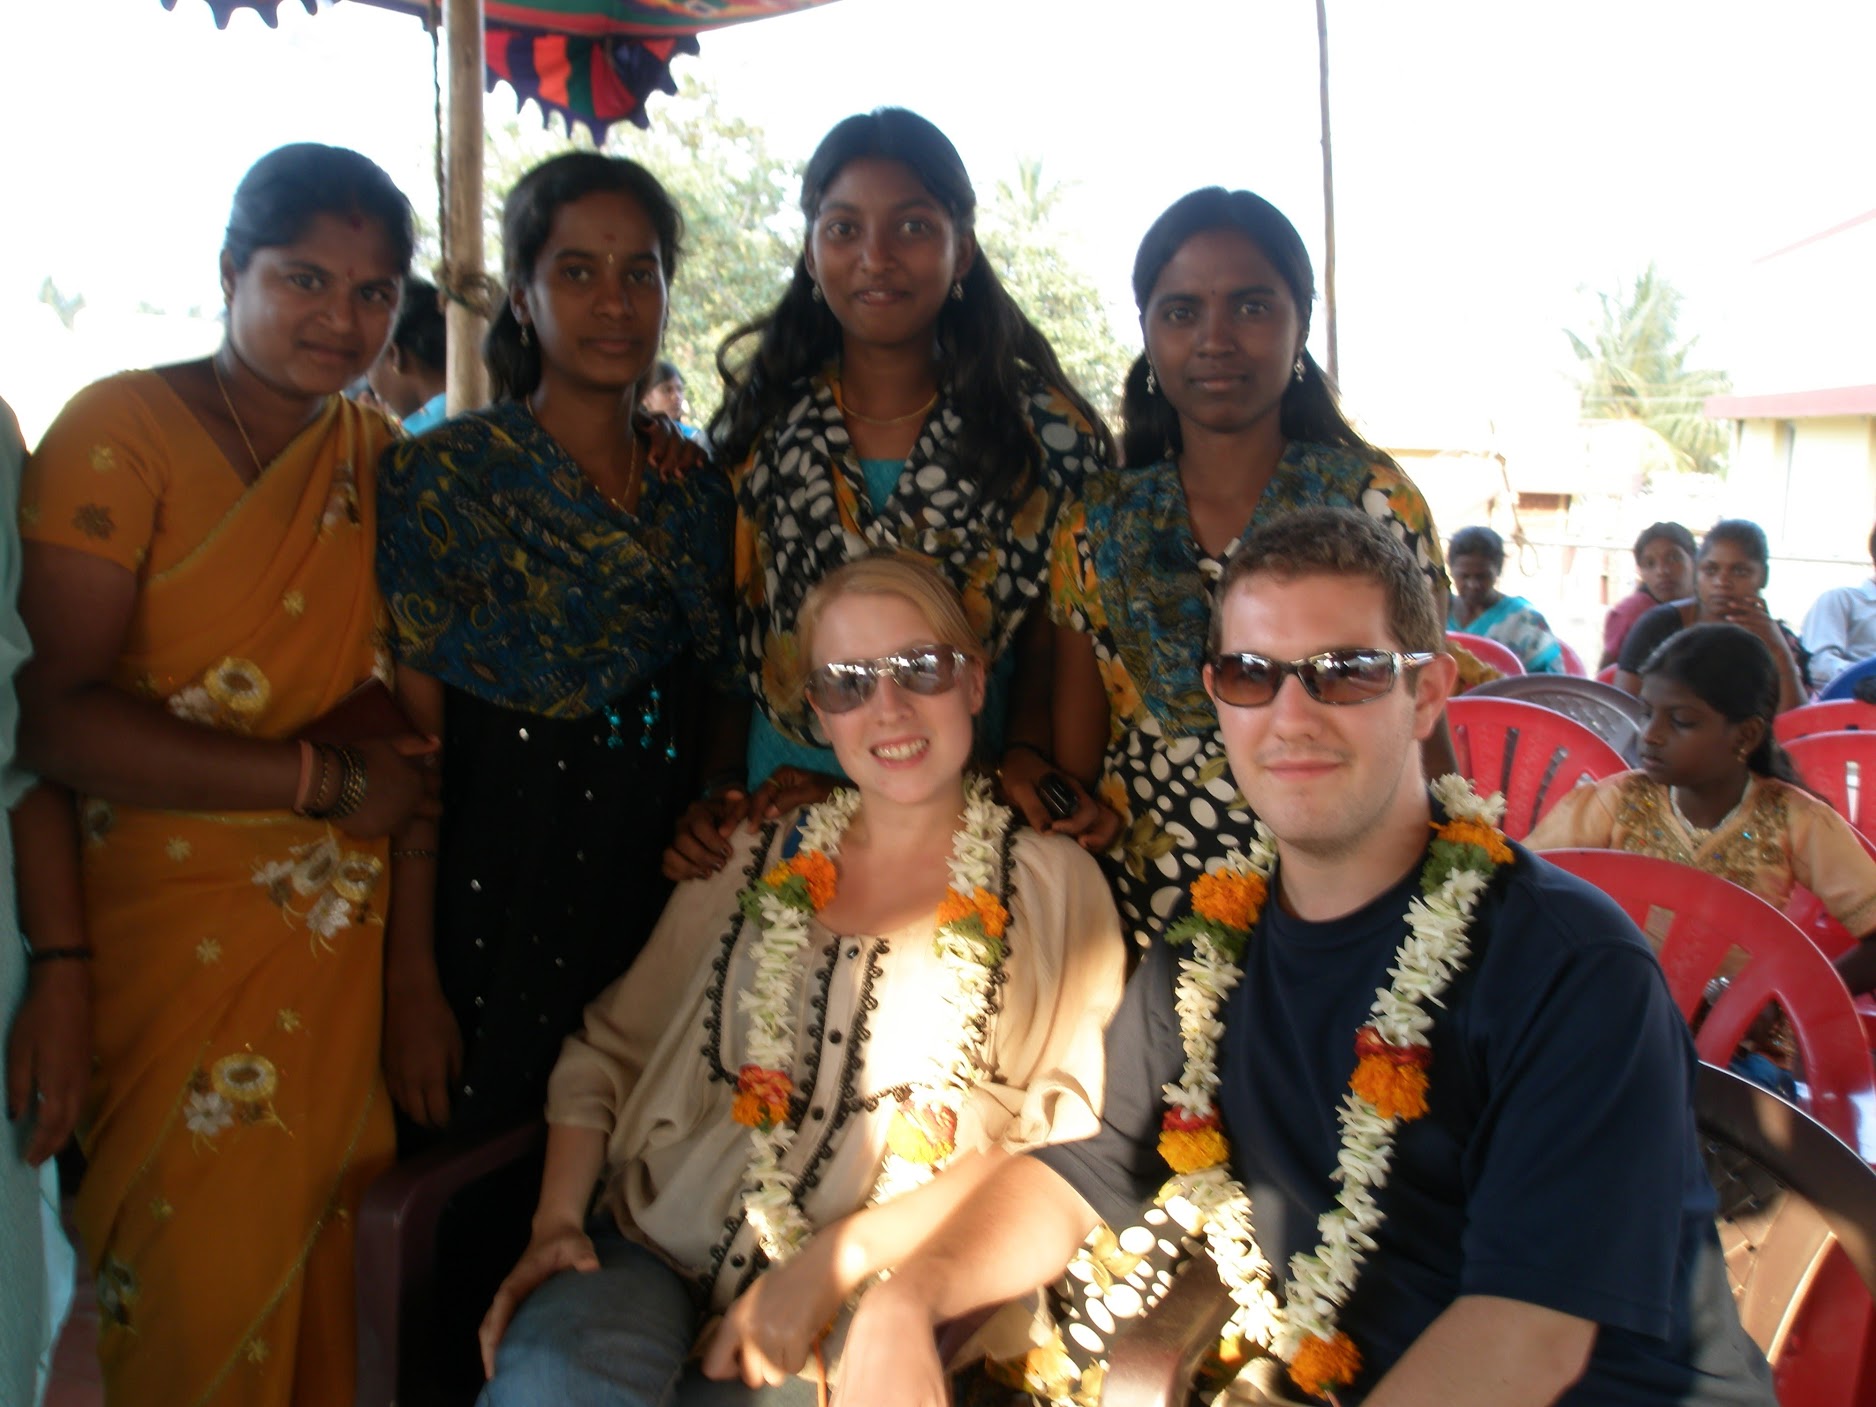 Karl & Rosie sit posing for a photo with flower garlands with 4 young Indian ladies posing behind in Kolar Gold Fields, India